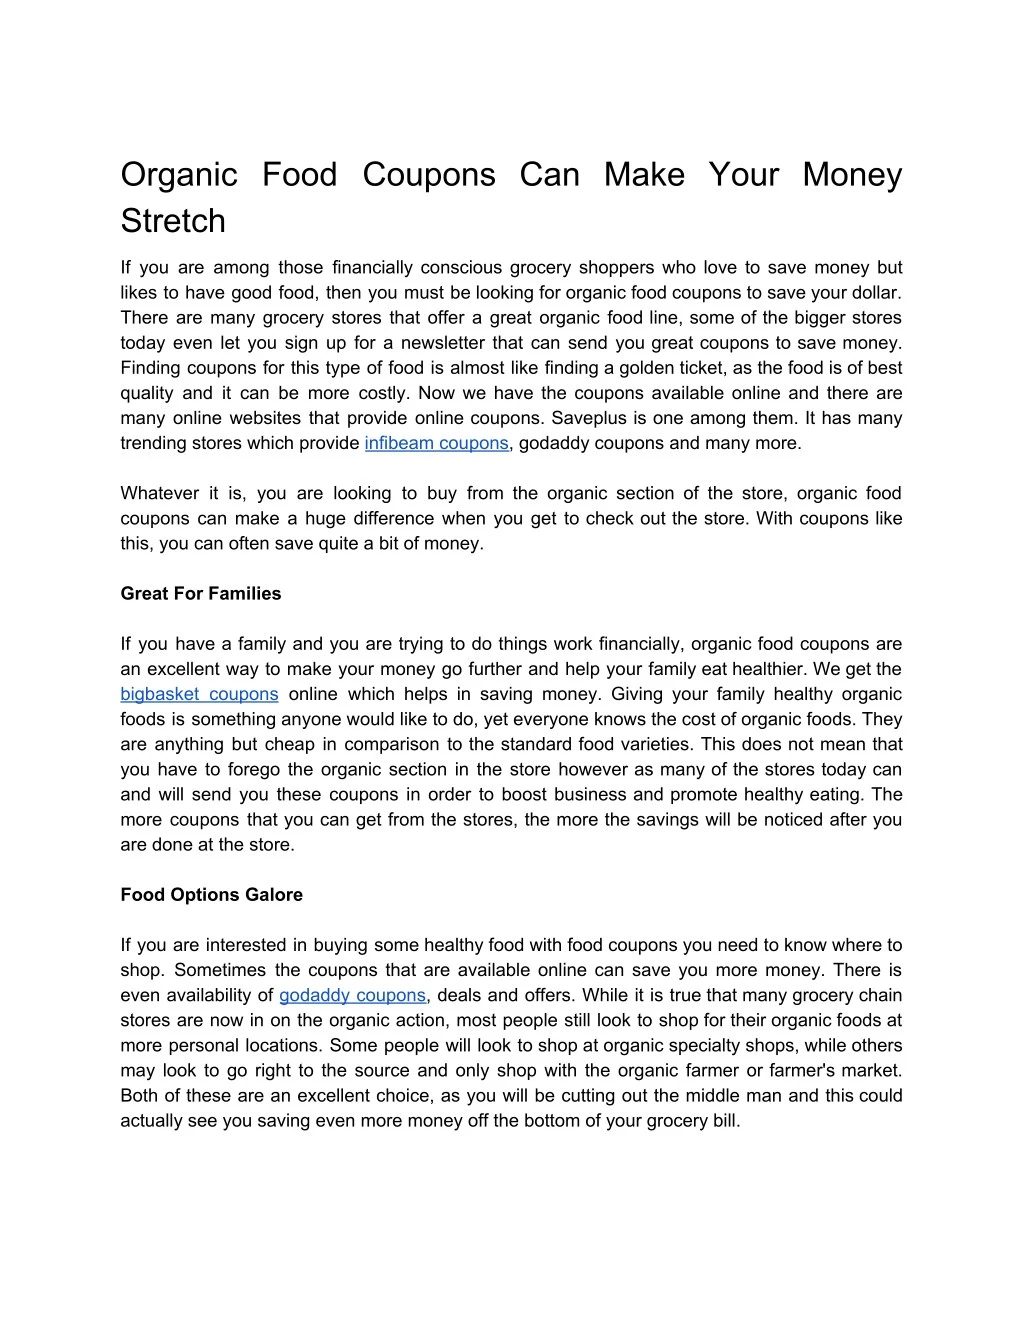 organic food coupons can make your money stretch